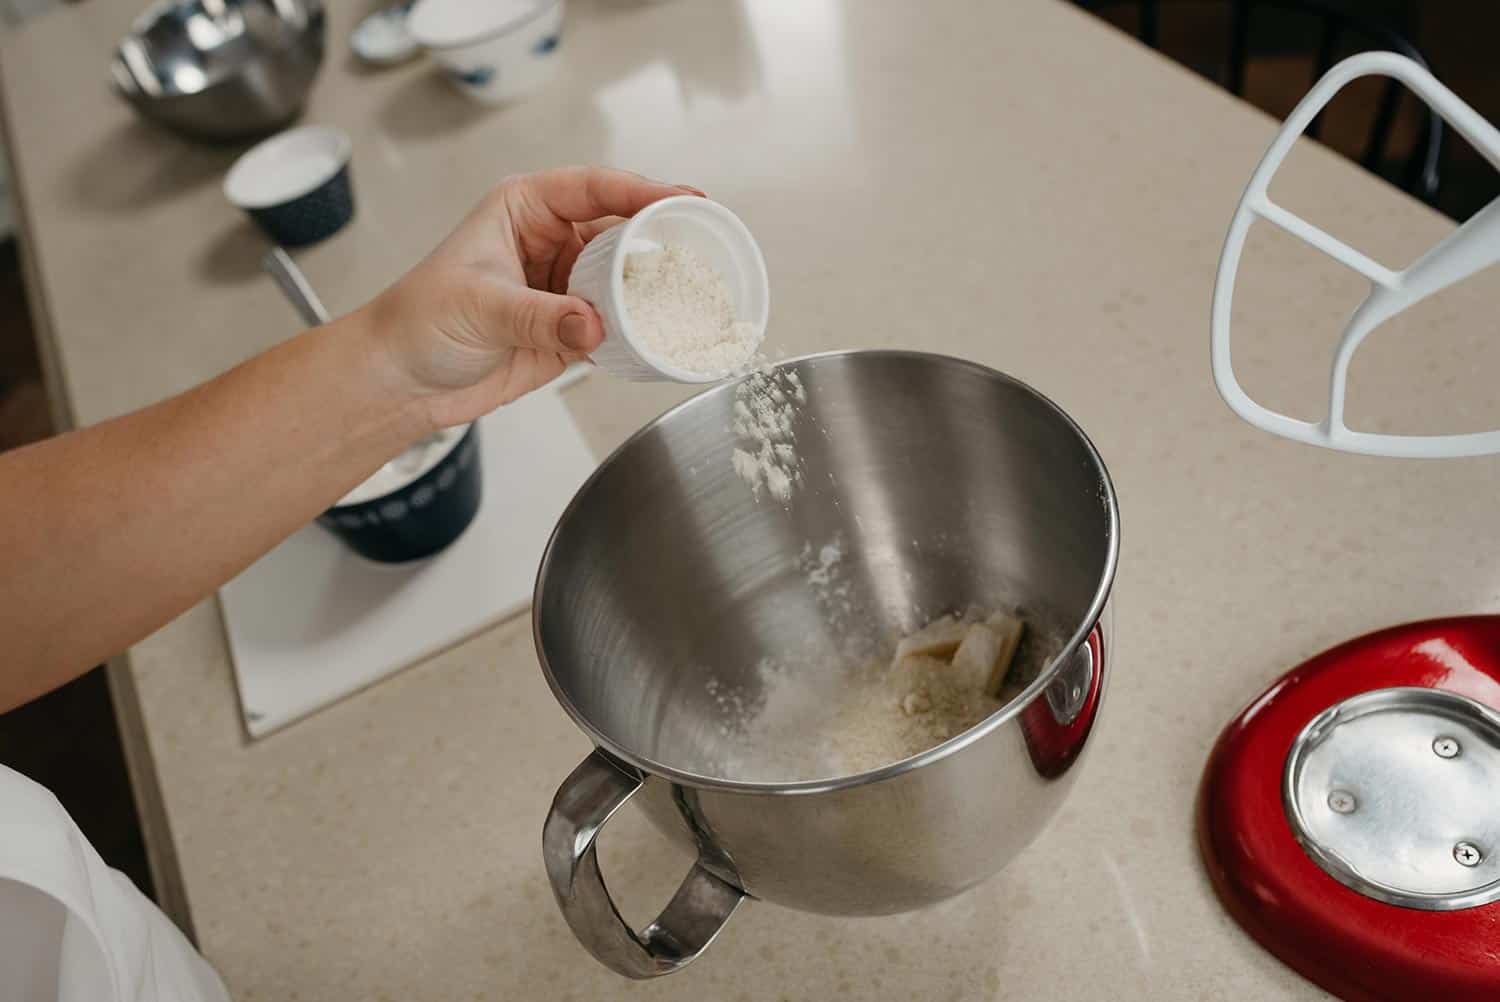 Woman who is putting an almond flour from the cup into the stainless steel bowl of the stand mixer